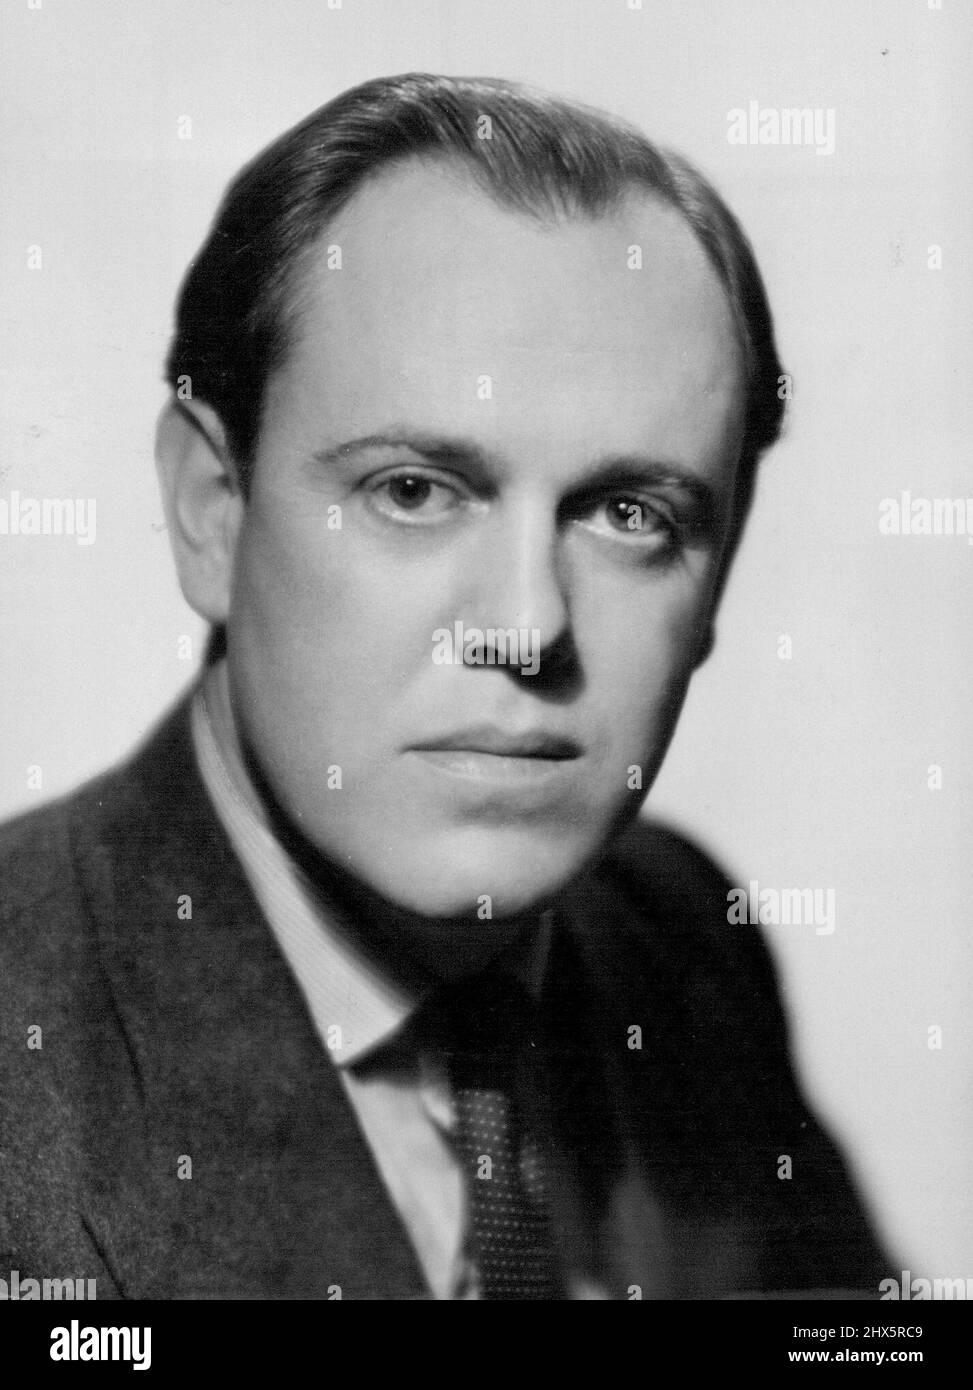 British Politicians: Christopher Soames, M.P. -- Conservative Member of Parliament for the Bedford Division of Bedfordshire; he is married to Mary, youngest daughter of Sir Winston Churchill. January 13, 1954. (Photo by Fayer, Camera Press). Stock Photo